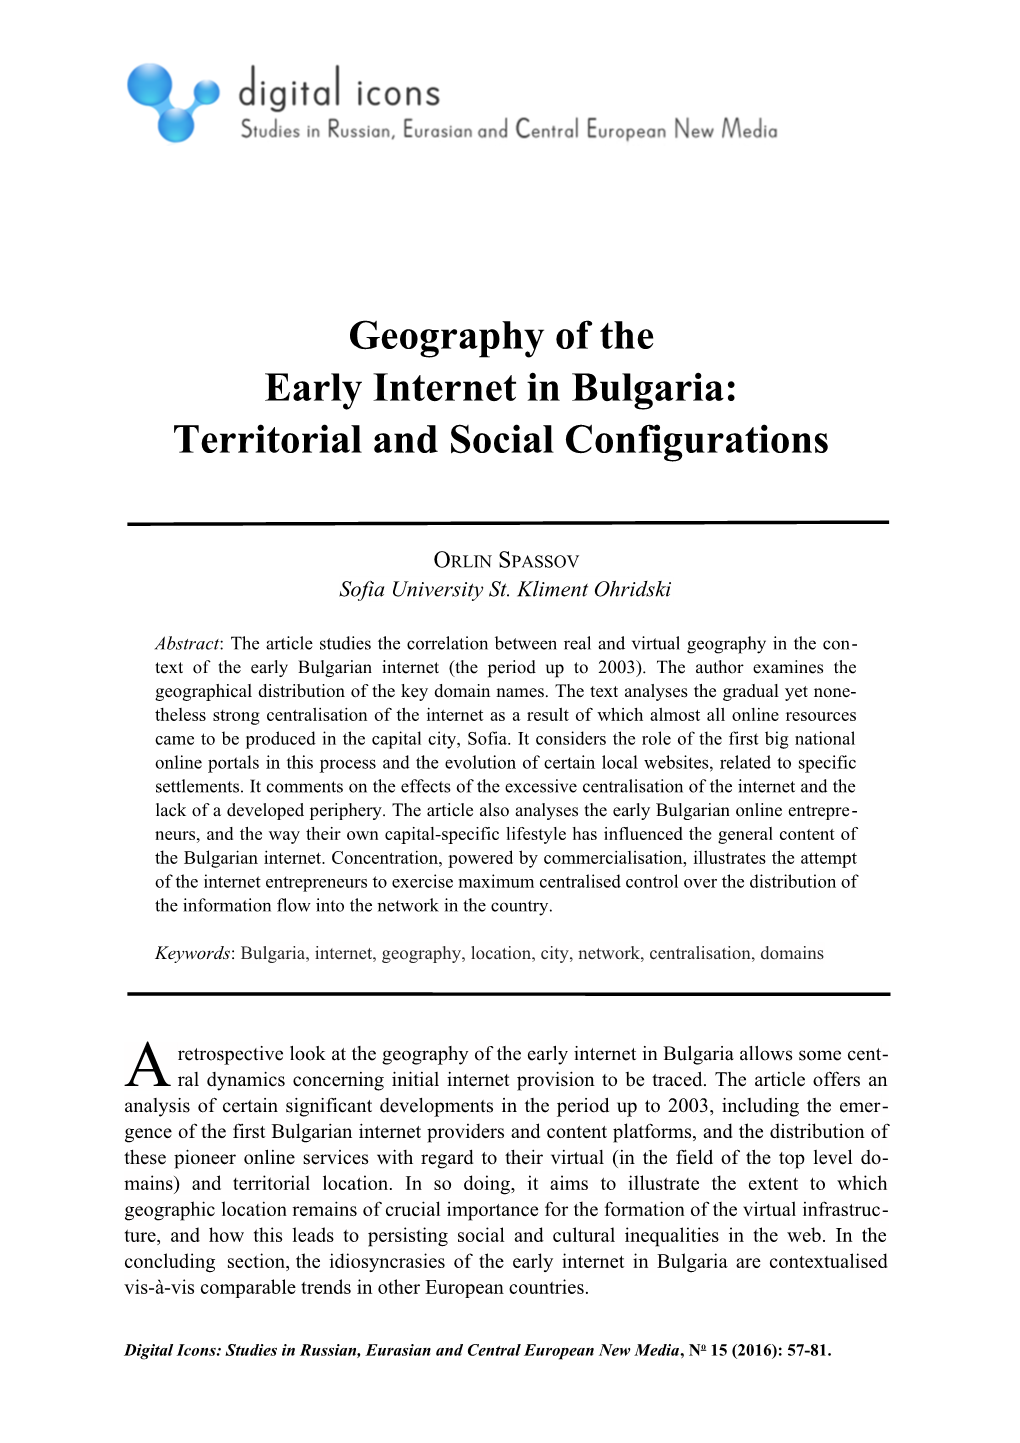 Geography of the Early Internet in Bulgaria: Territorial and Social Configurations